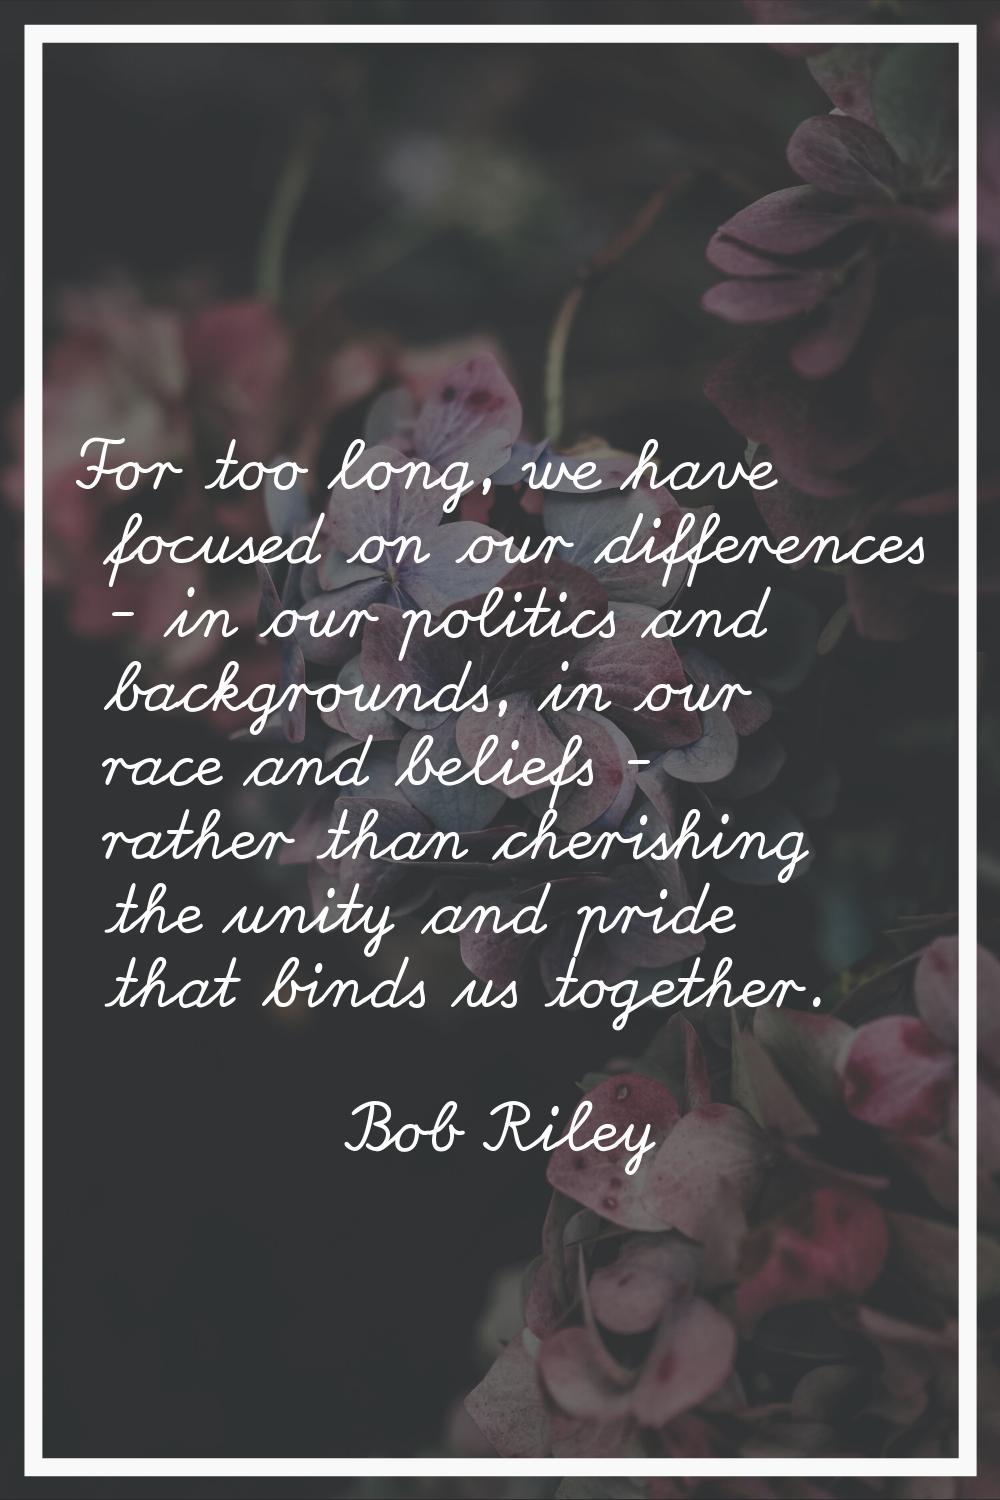 For too long, we have focused on our differences - in our politics and backgrounds, in our race and